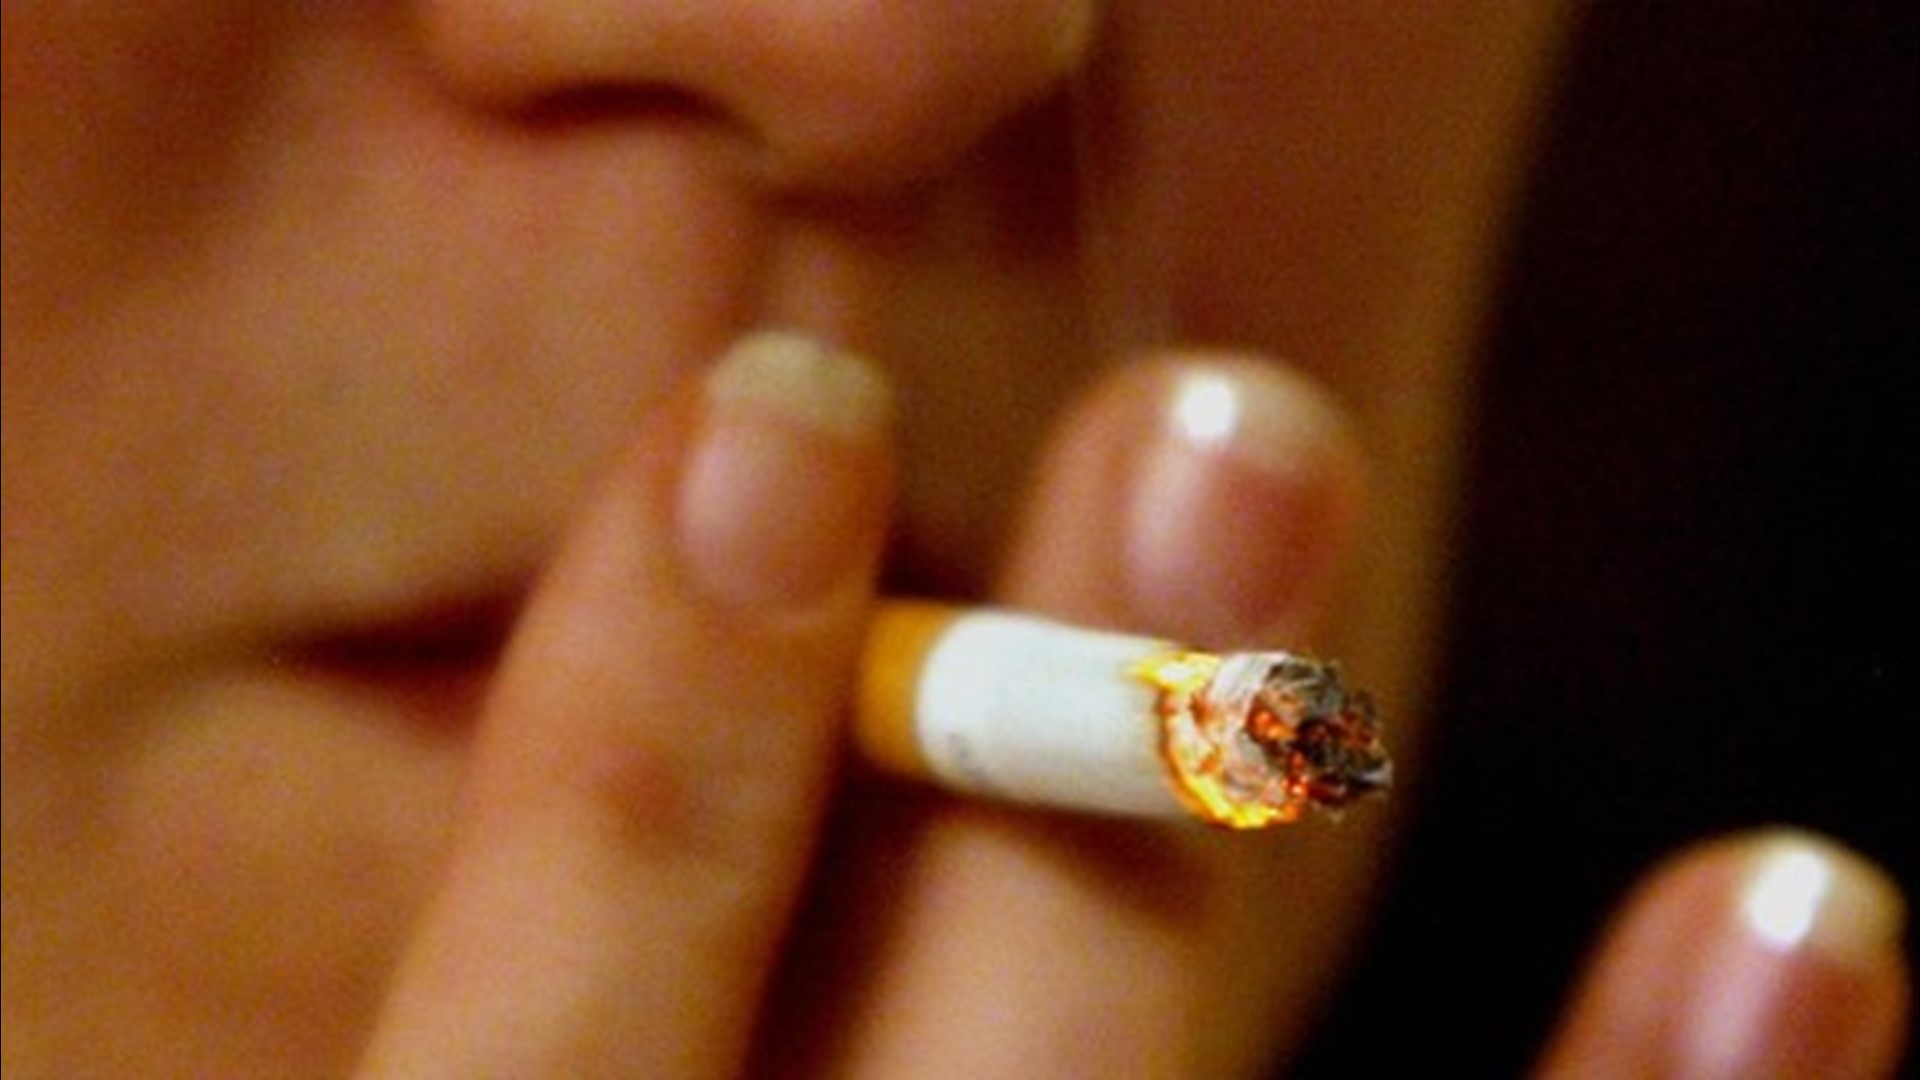 The American Lung Association says this is the perfect year to quit smoking for good!